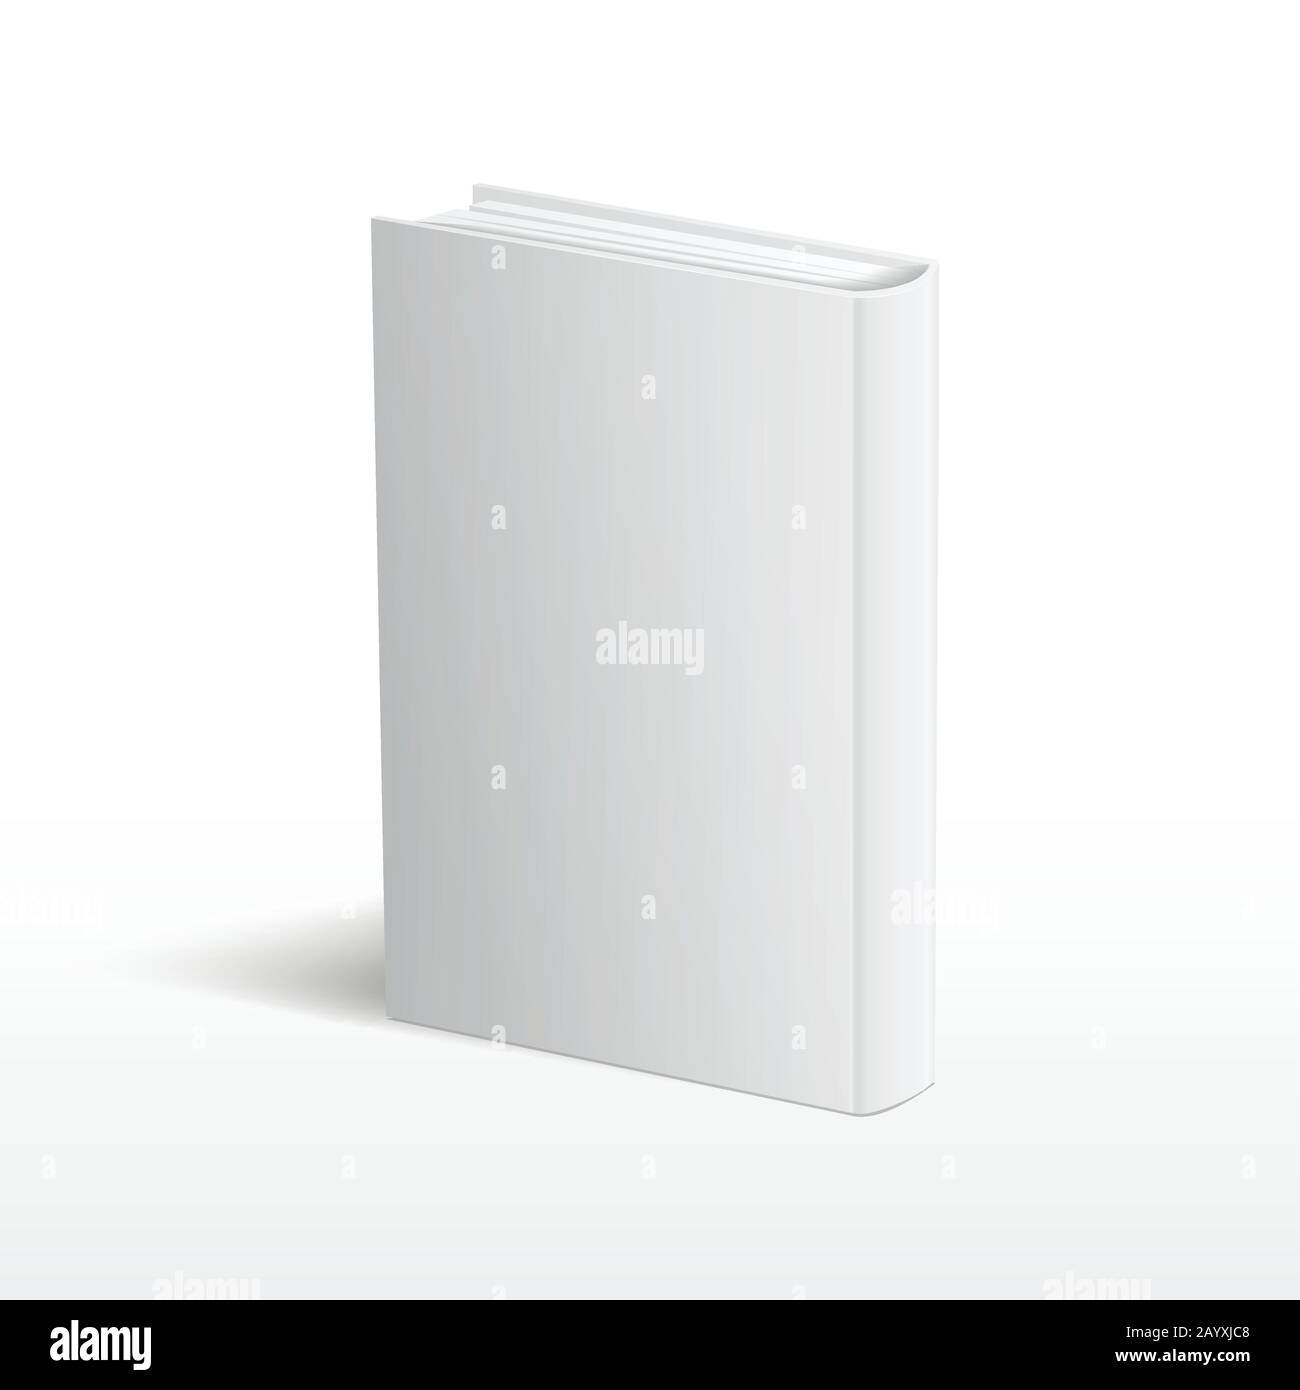 Realistic blank book. Standing hardcover mockup. Cover prese